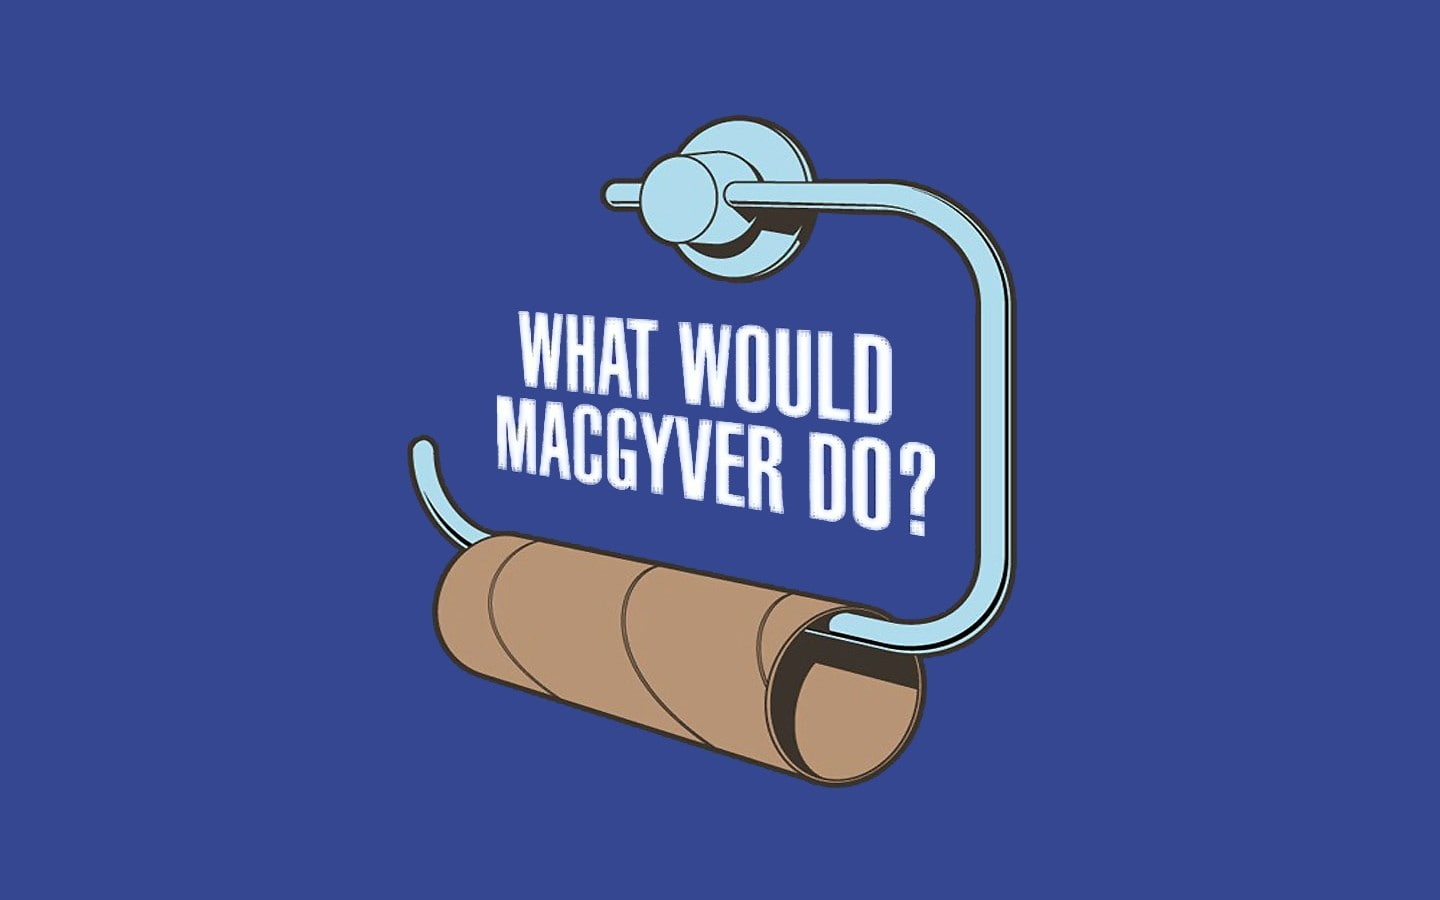 macgyver, simple background, humor, toilet paper, blue, communication